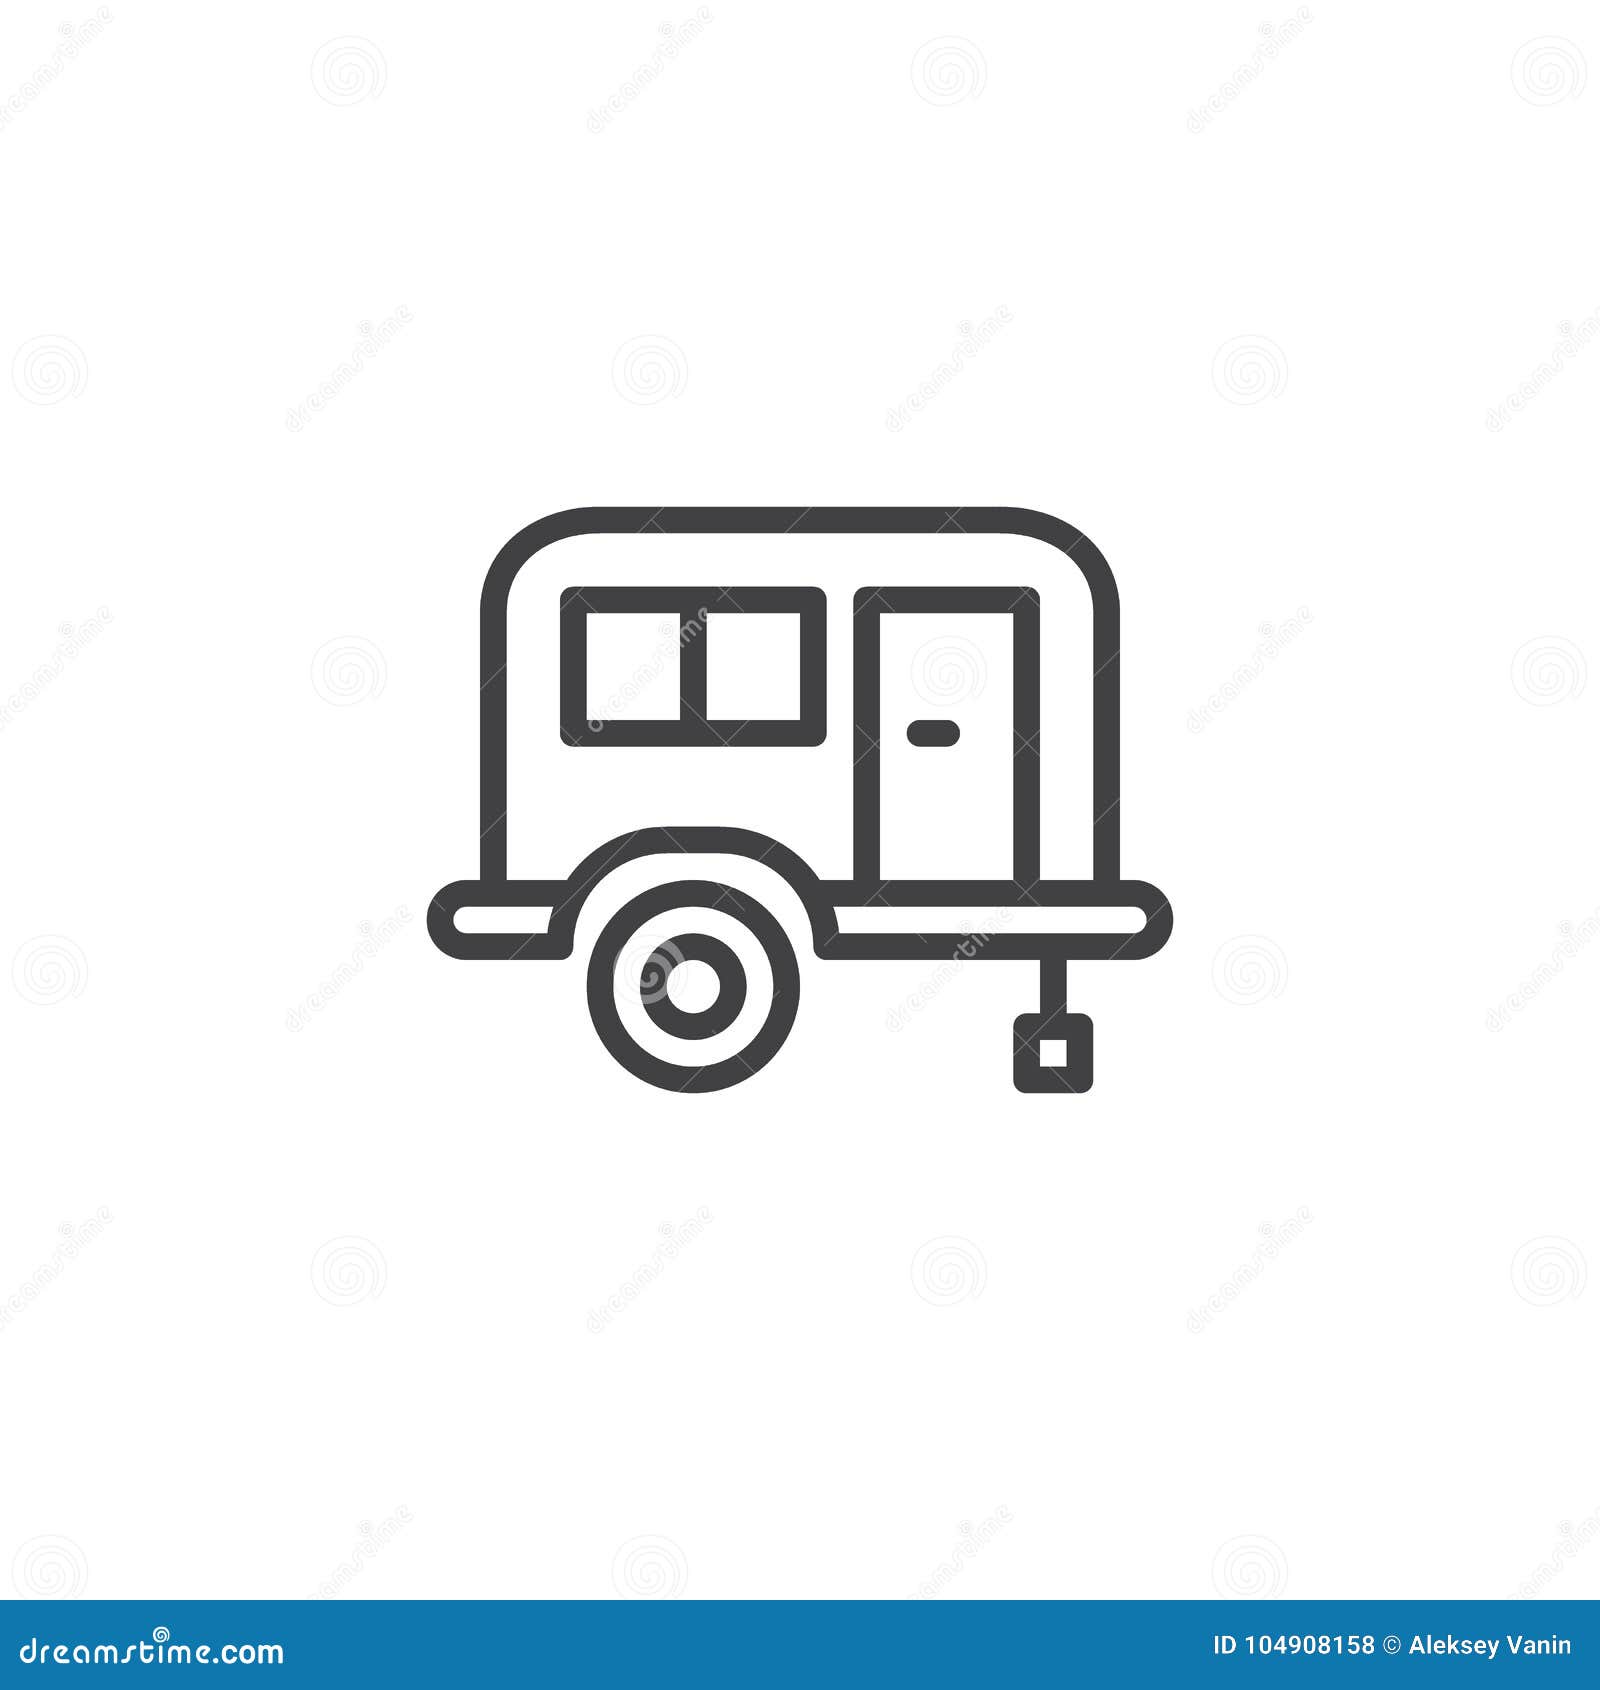 Camping trailer line icon stock vector. Illustration of camper - 104908158